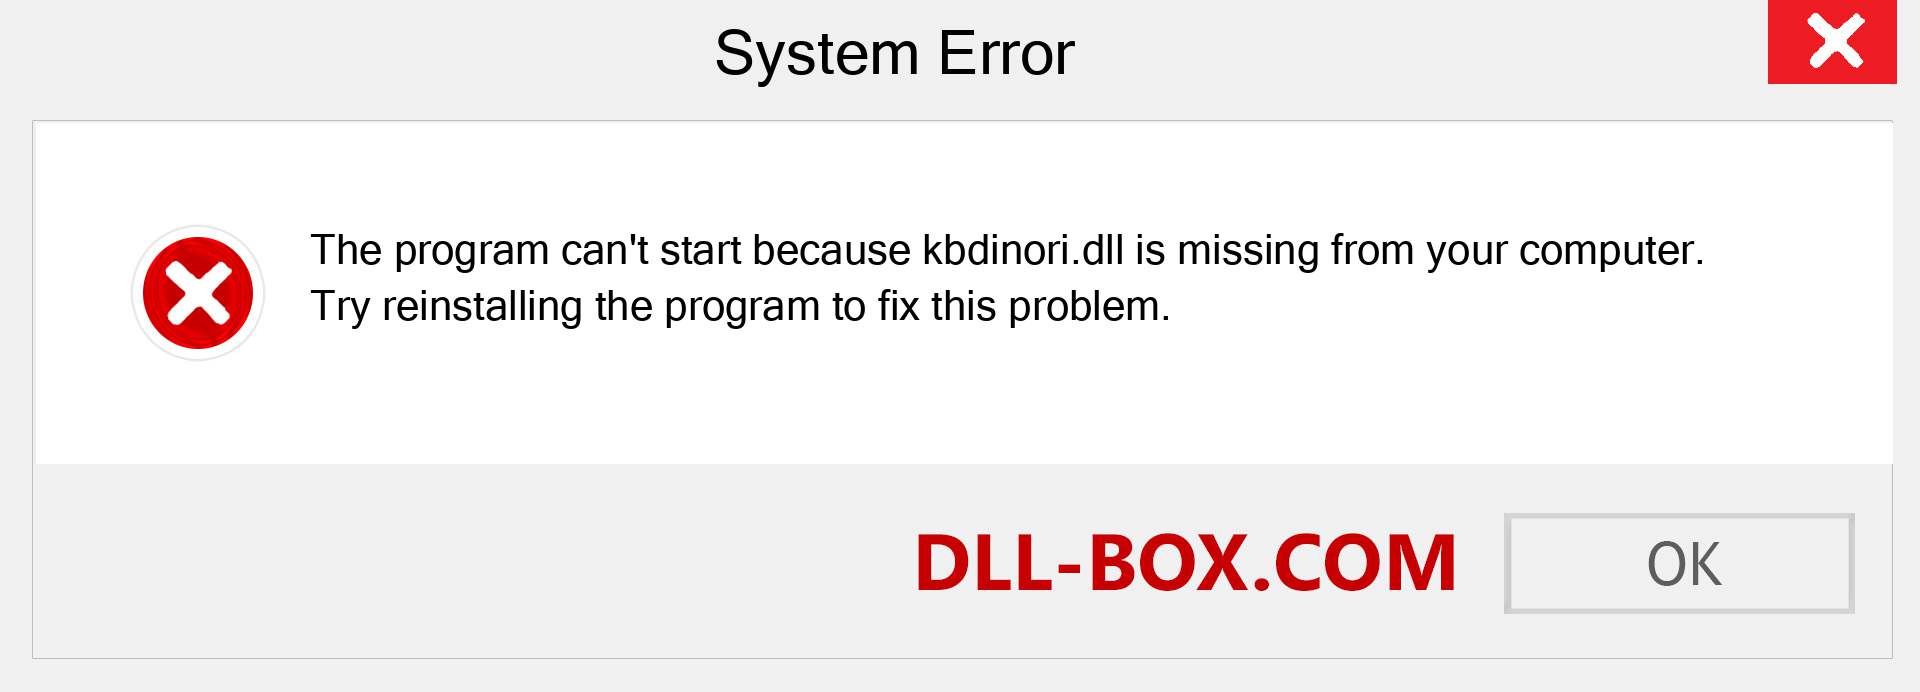  kbdinori.dll file is missing?. Download for Windows 7, 8, 10 - Fix  kbdinori dll Missing Error on Windows, photos, images